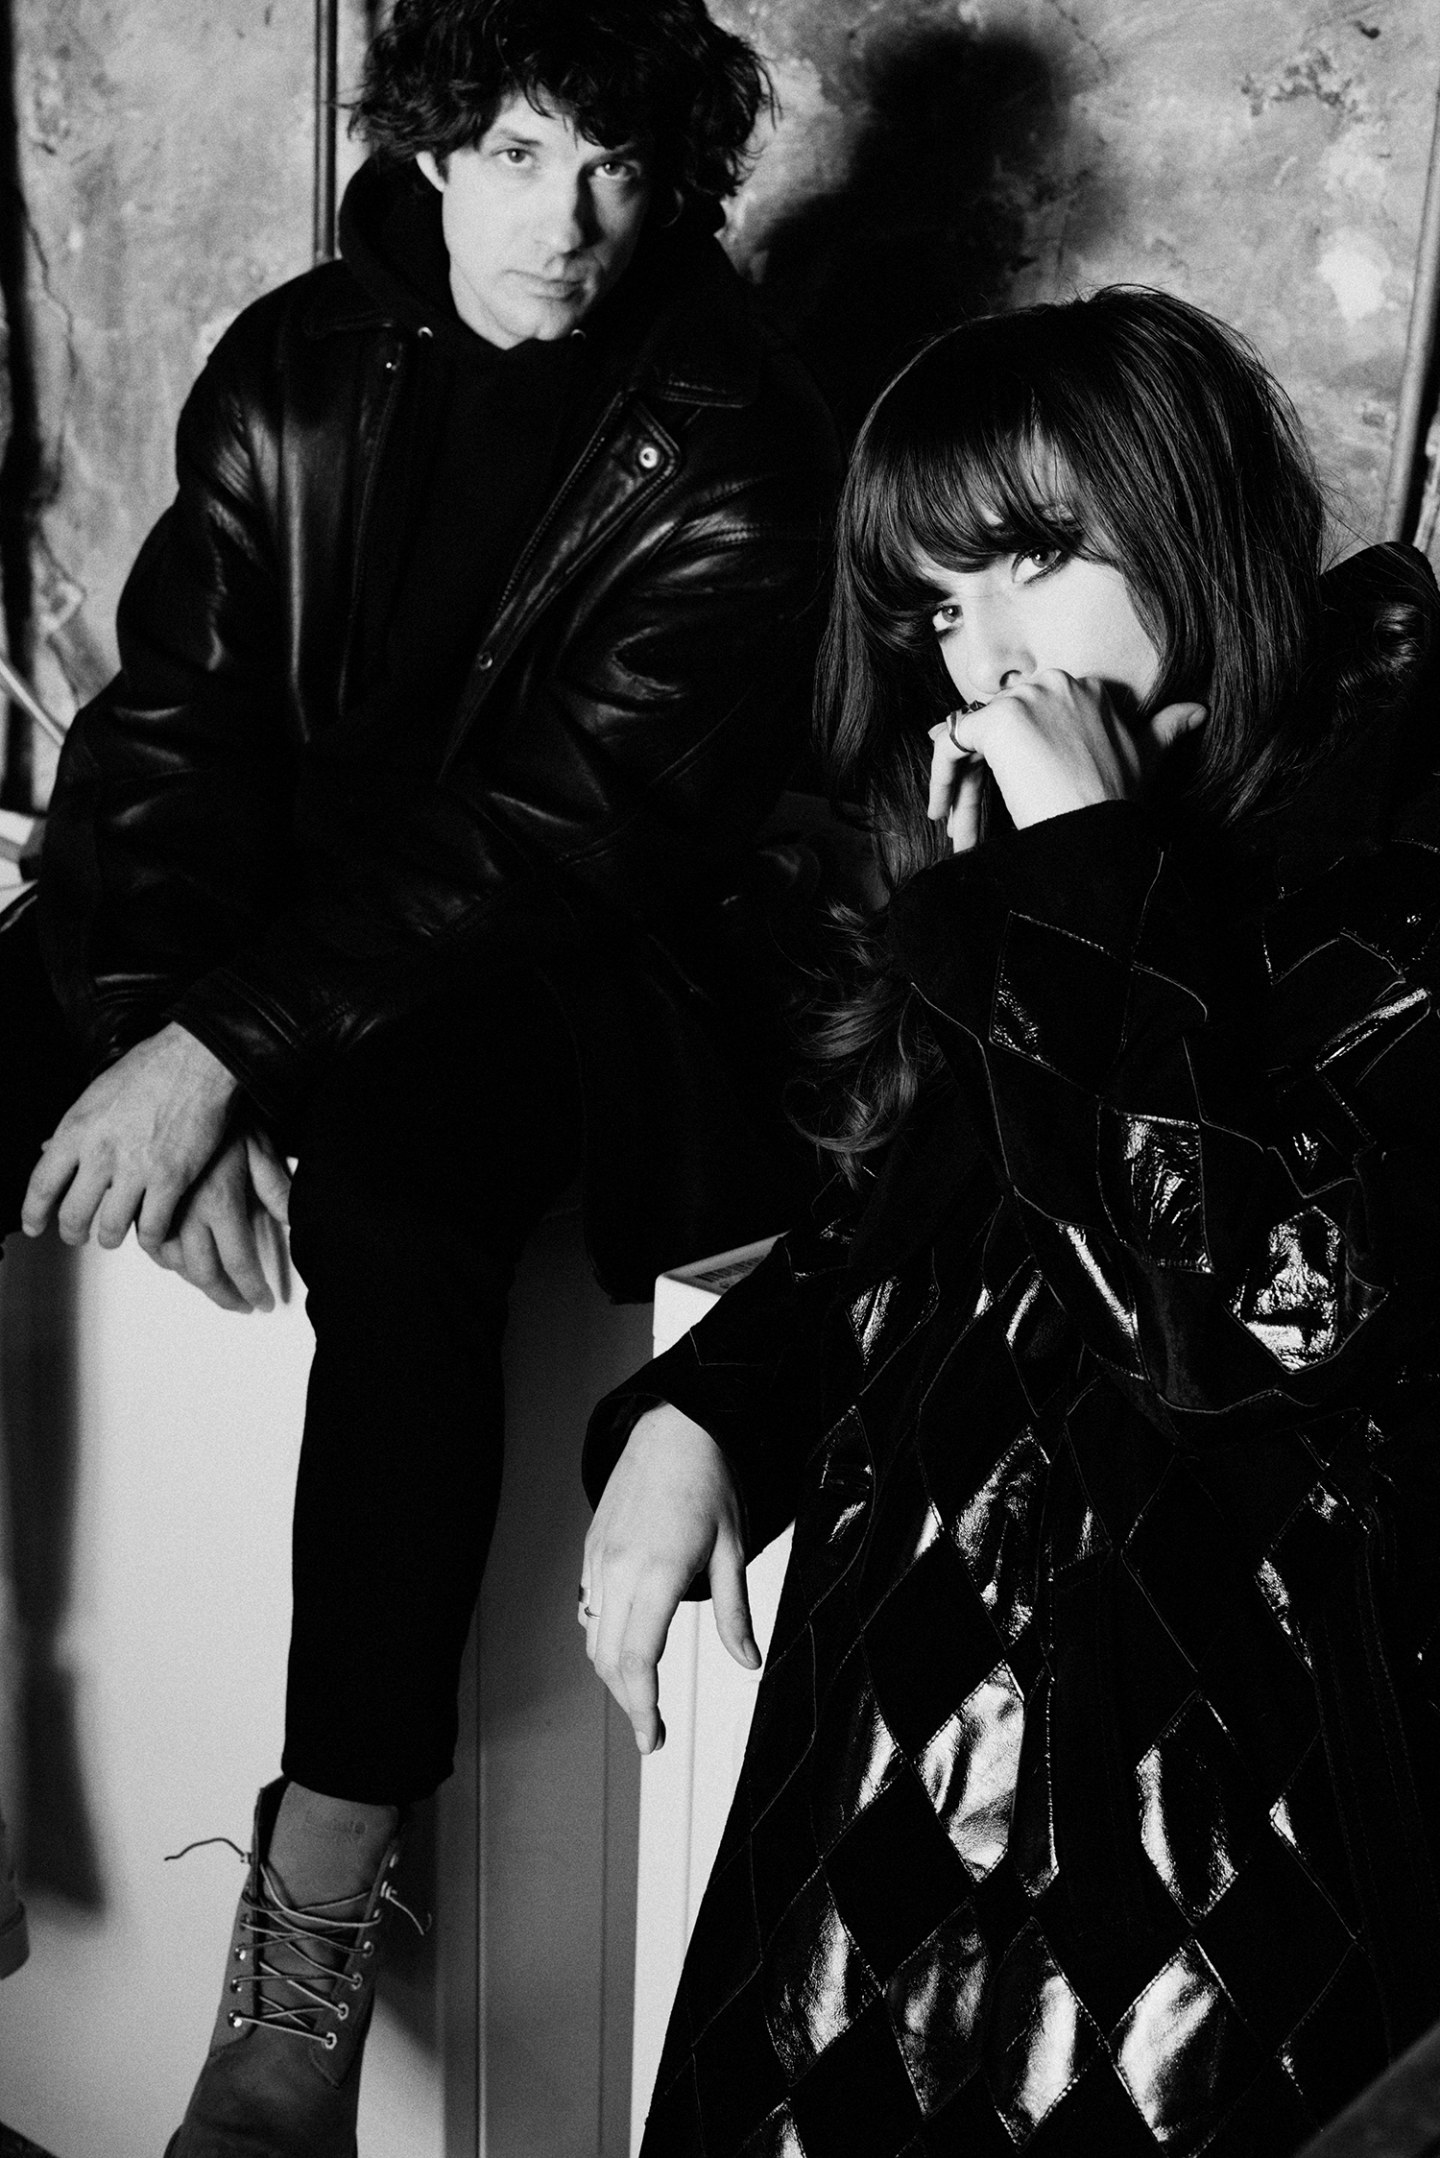 Somehow, Beach House is still getting better